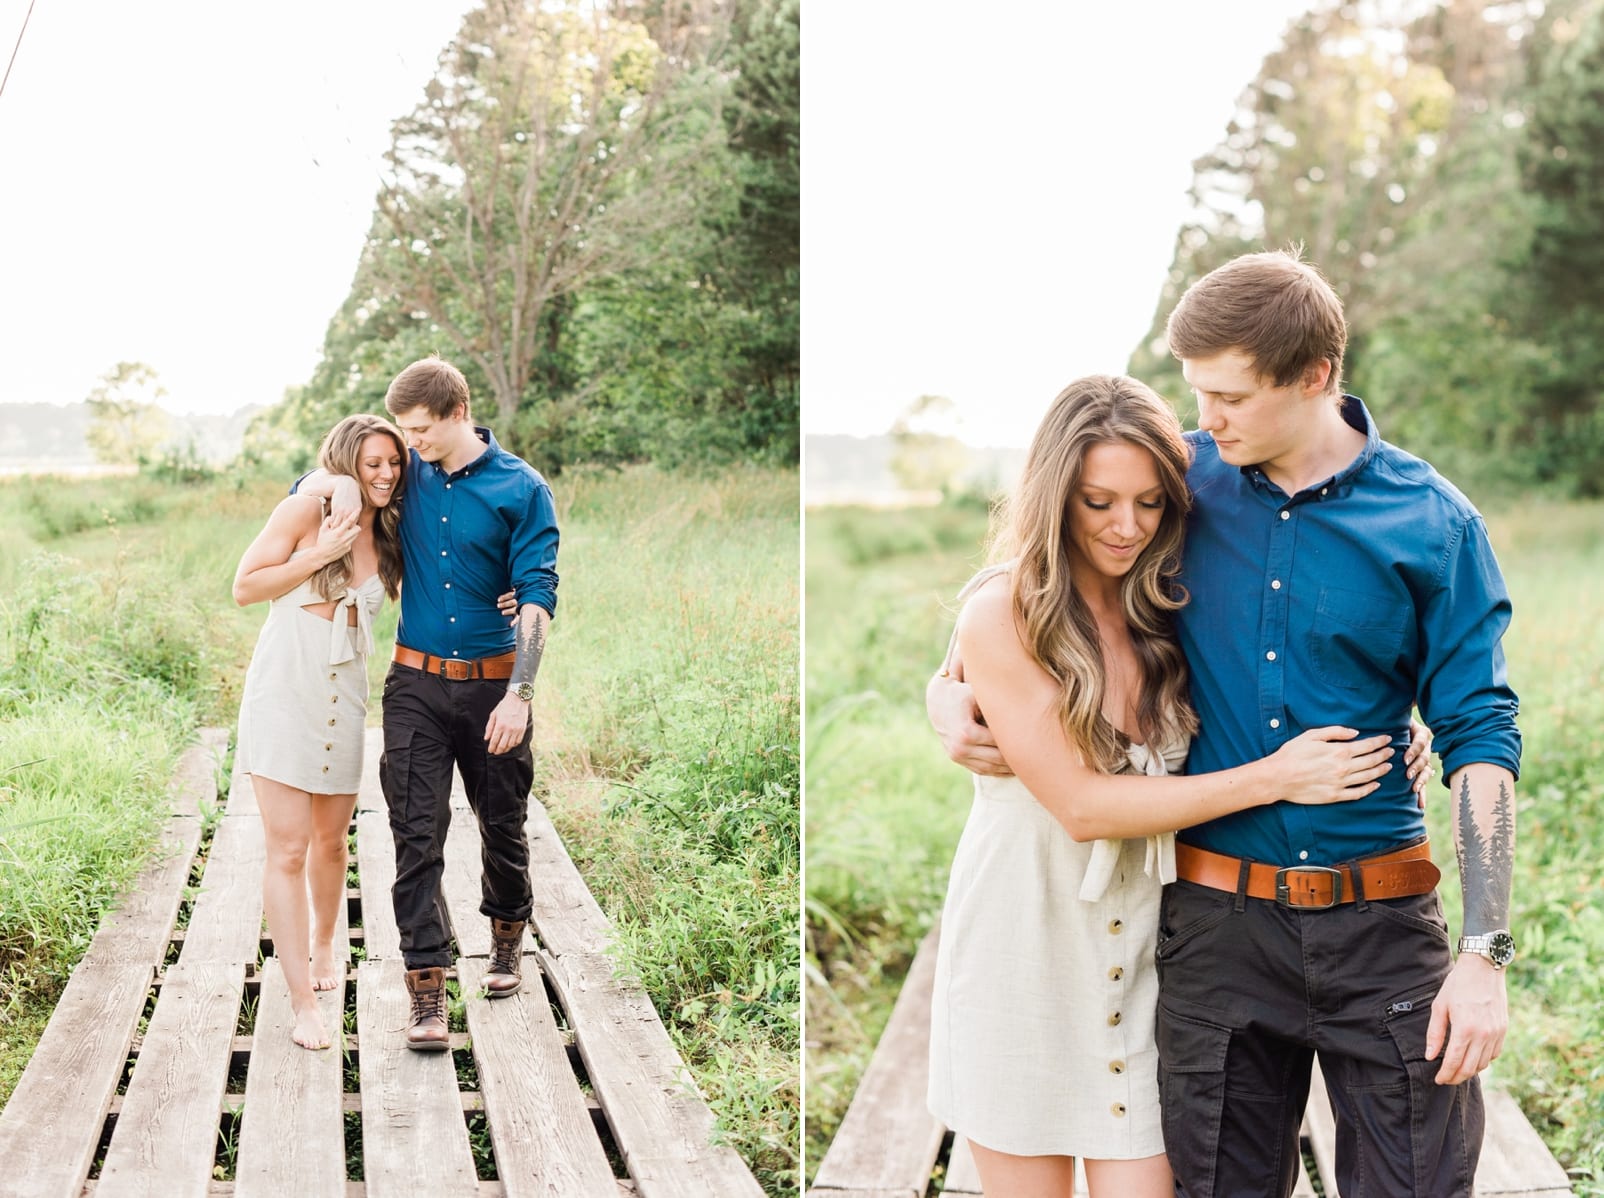 Raleigh sunset engagement session with couple walking on along a boardwalk in bare feet photo